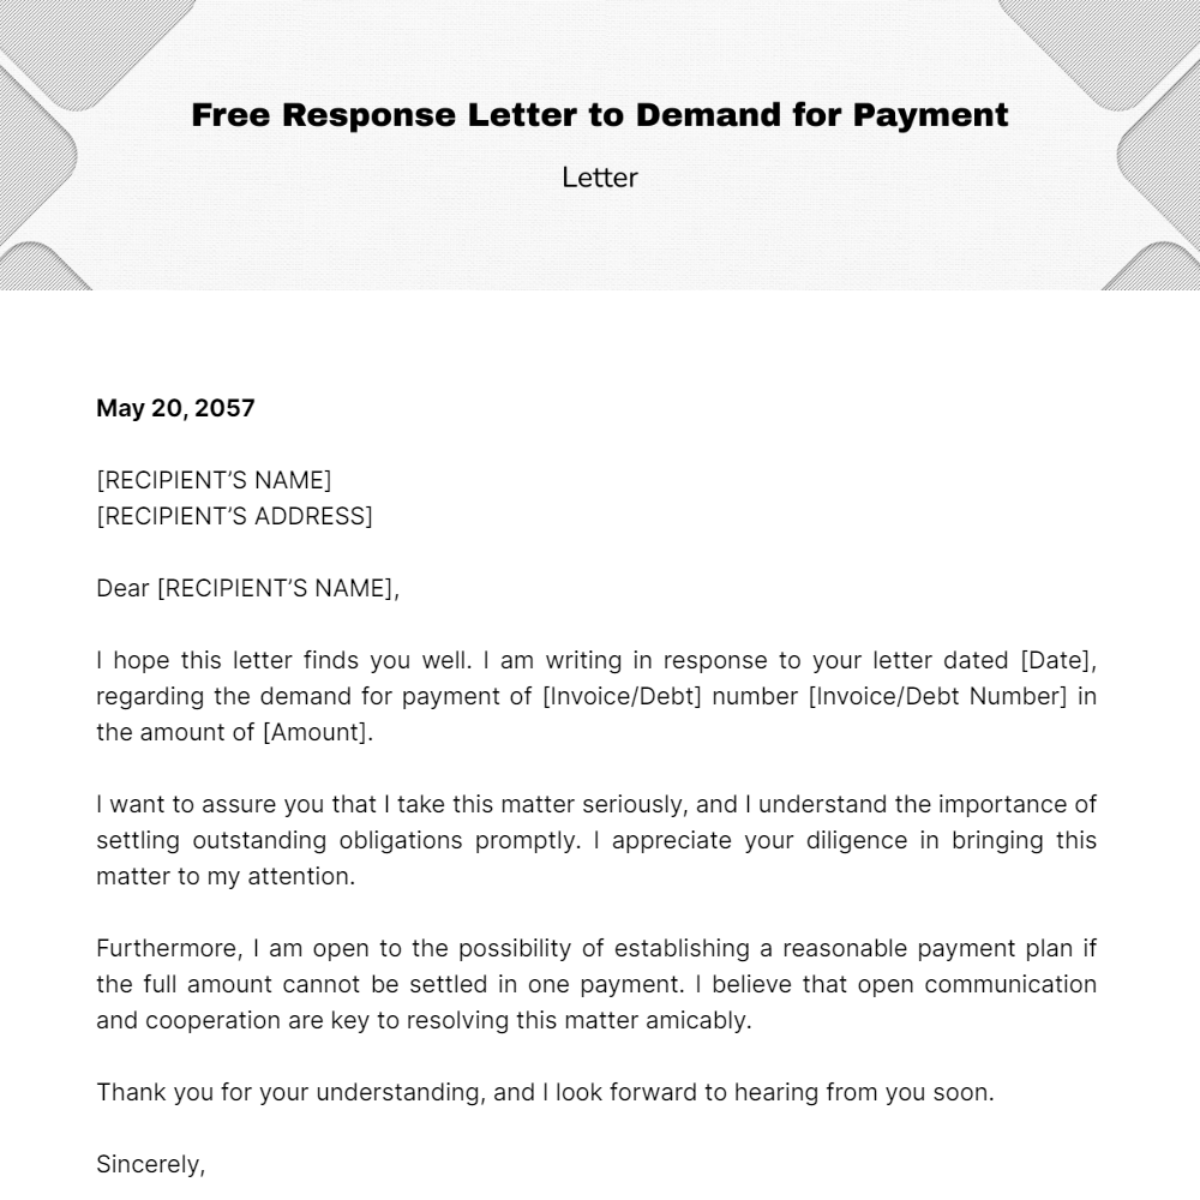 Free Response Letter to Demand for Payment